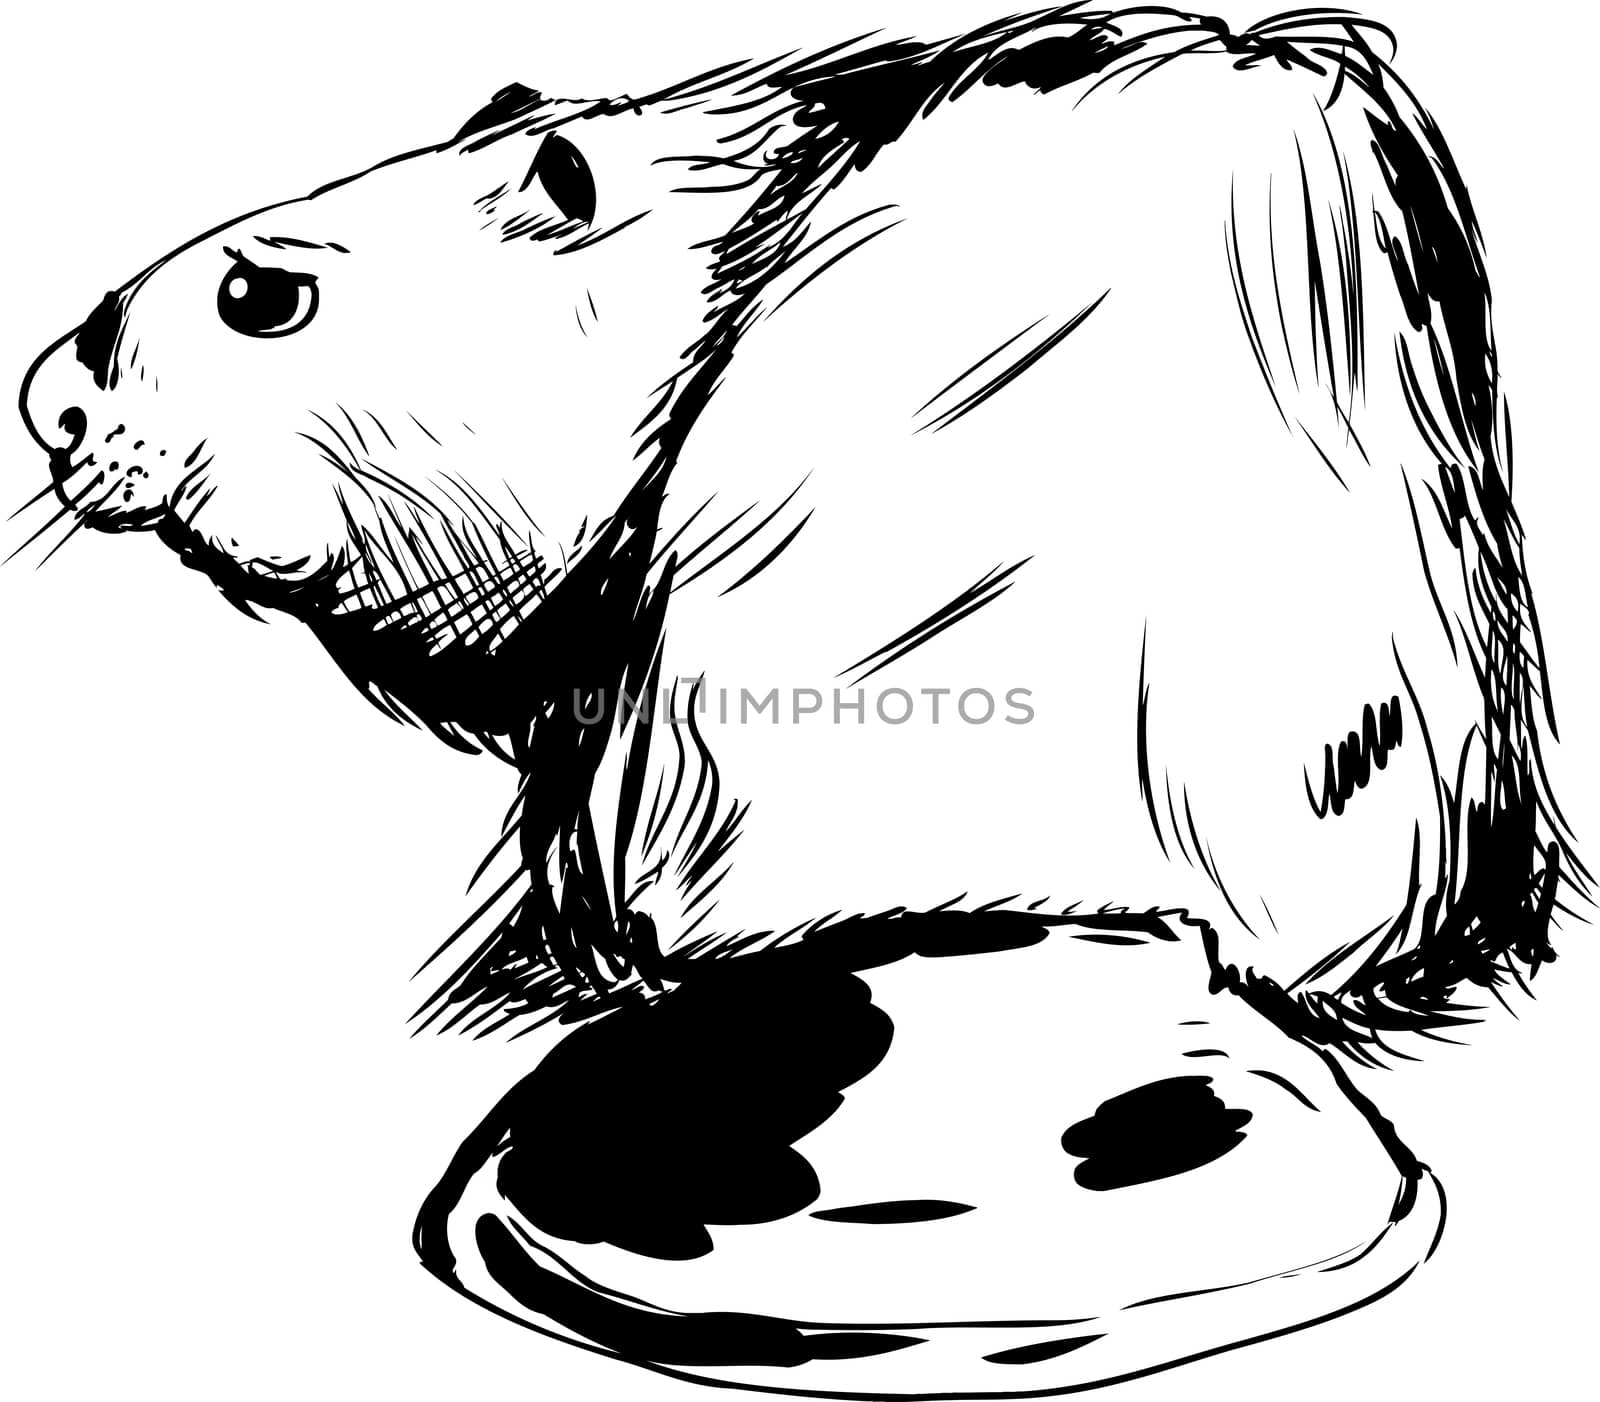 Outlined Beaver Illustration by TheBlackRhino